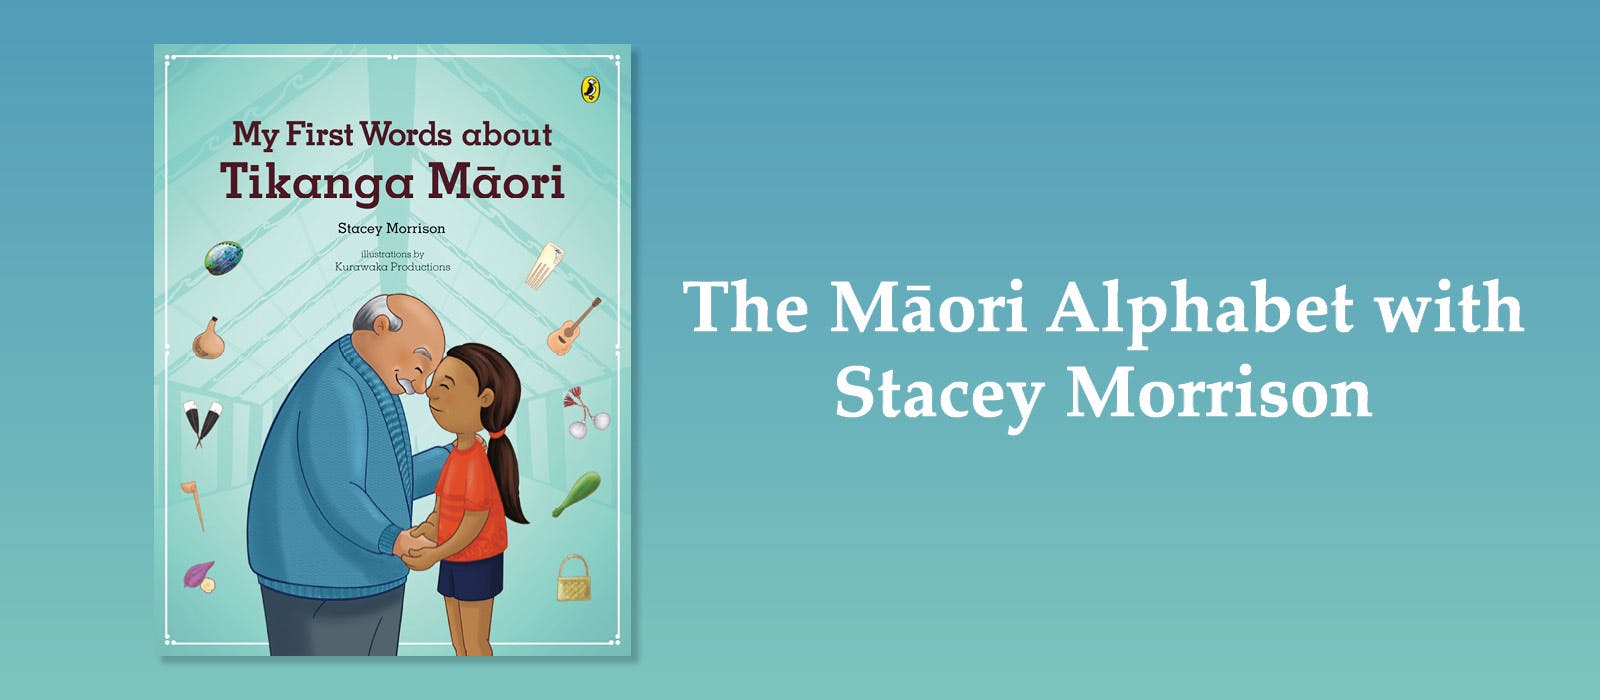 The Māori Alphabet with Stacey Morrison